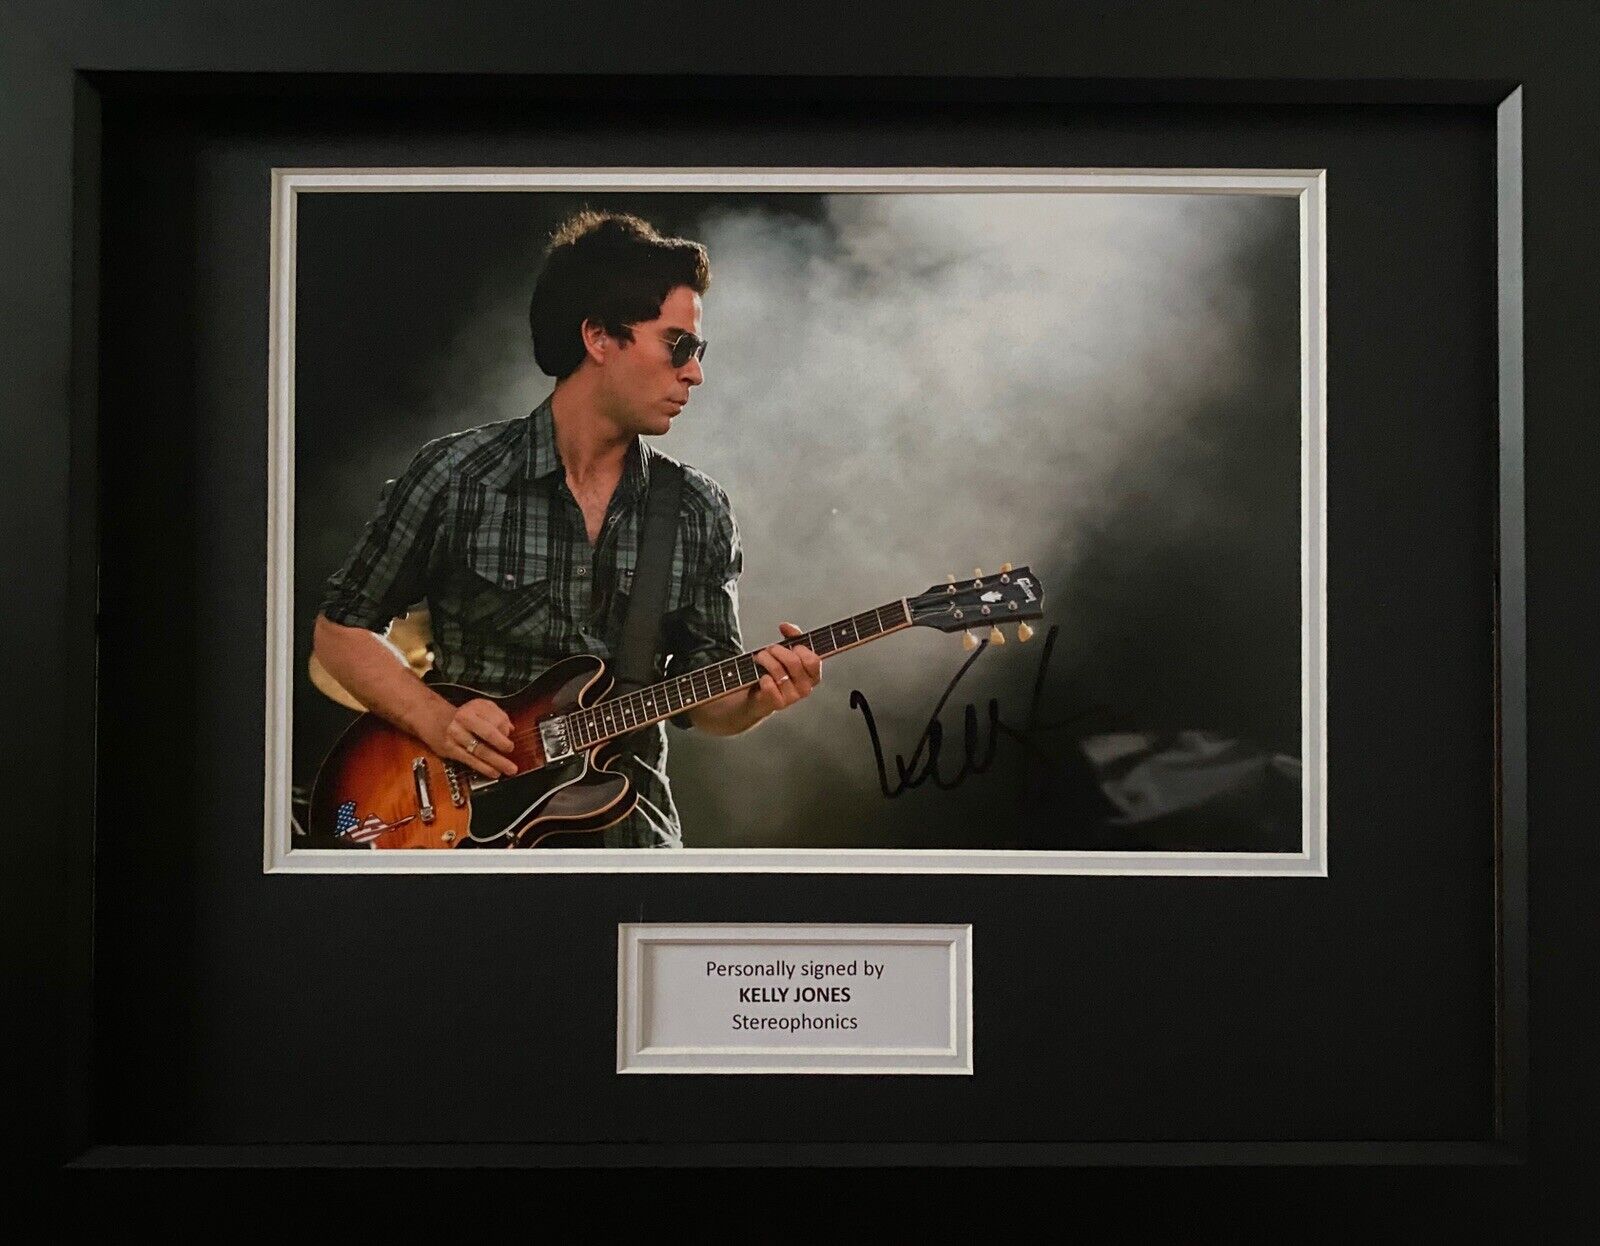 Kelly Jones Signed Stereophonics Photo Poster painting In 16x12 Frame Display, EXACT PROOF